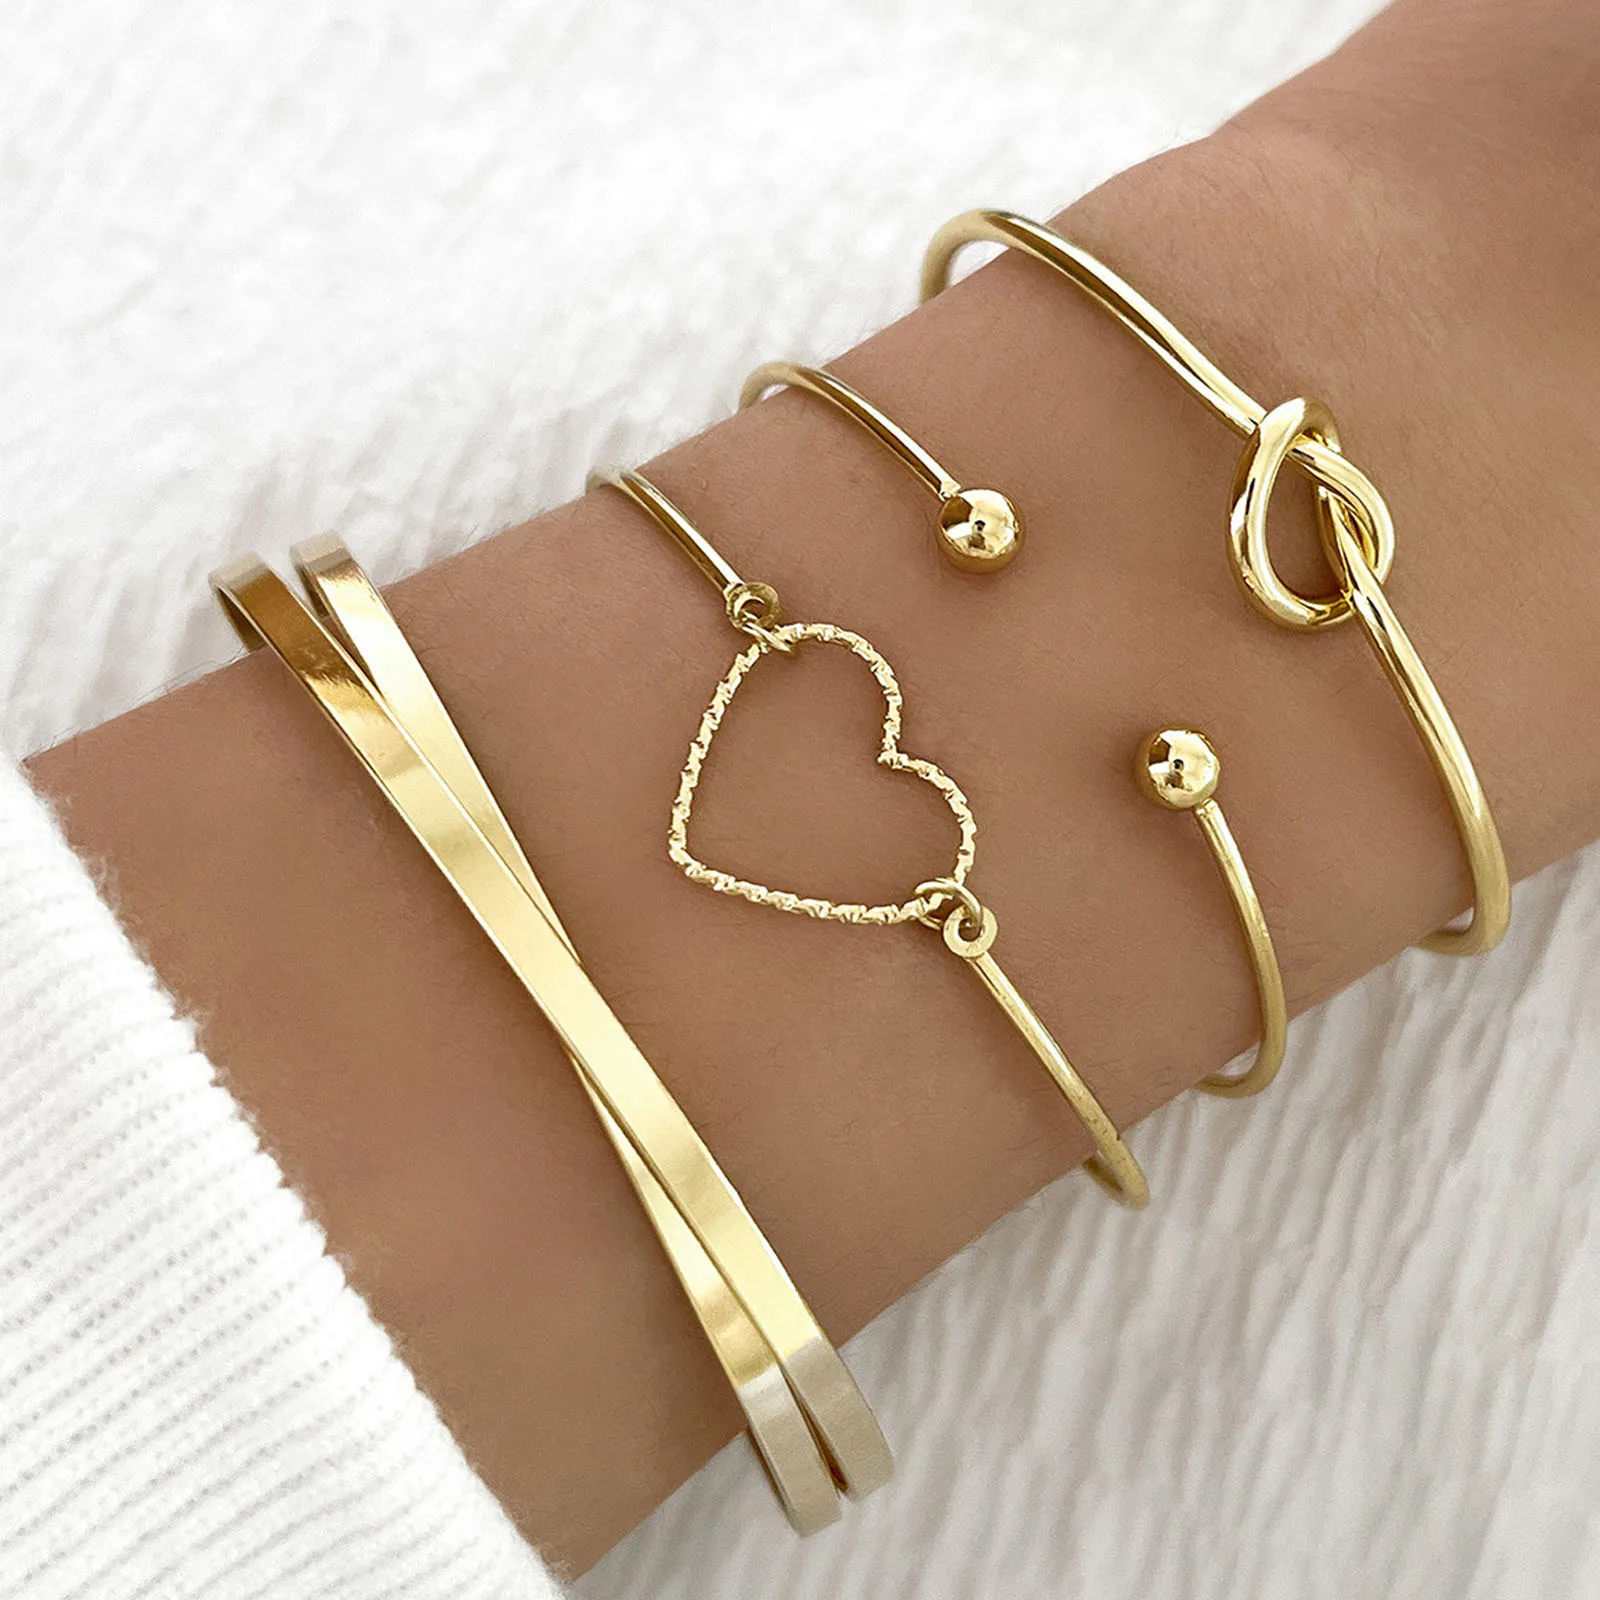 

Gold Bracelets Bangles Cuffs Jewelry Sets for Women Ladies Dainty Bangle Stackable Bracelet Set Wrap Cuff for Teen Girls